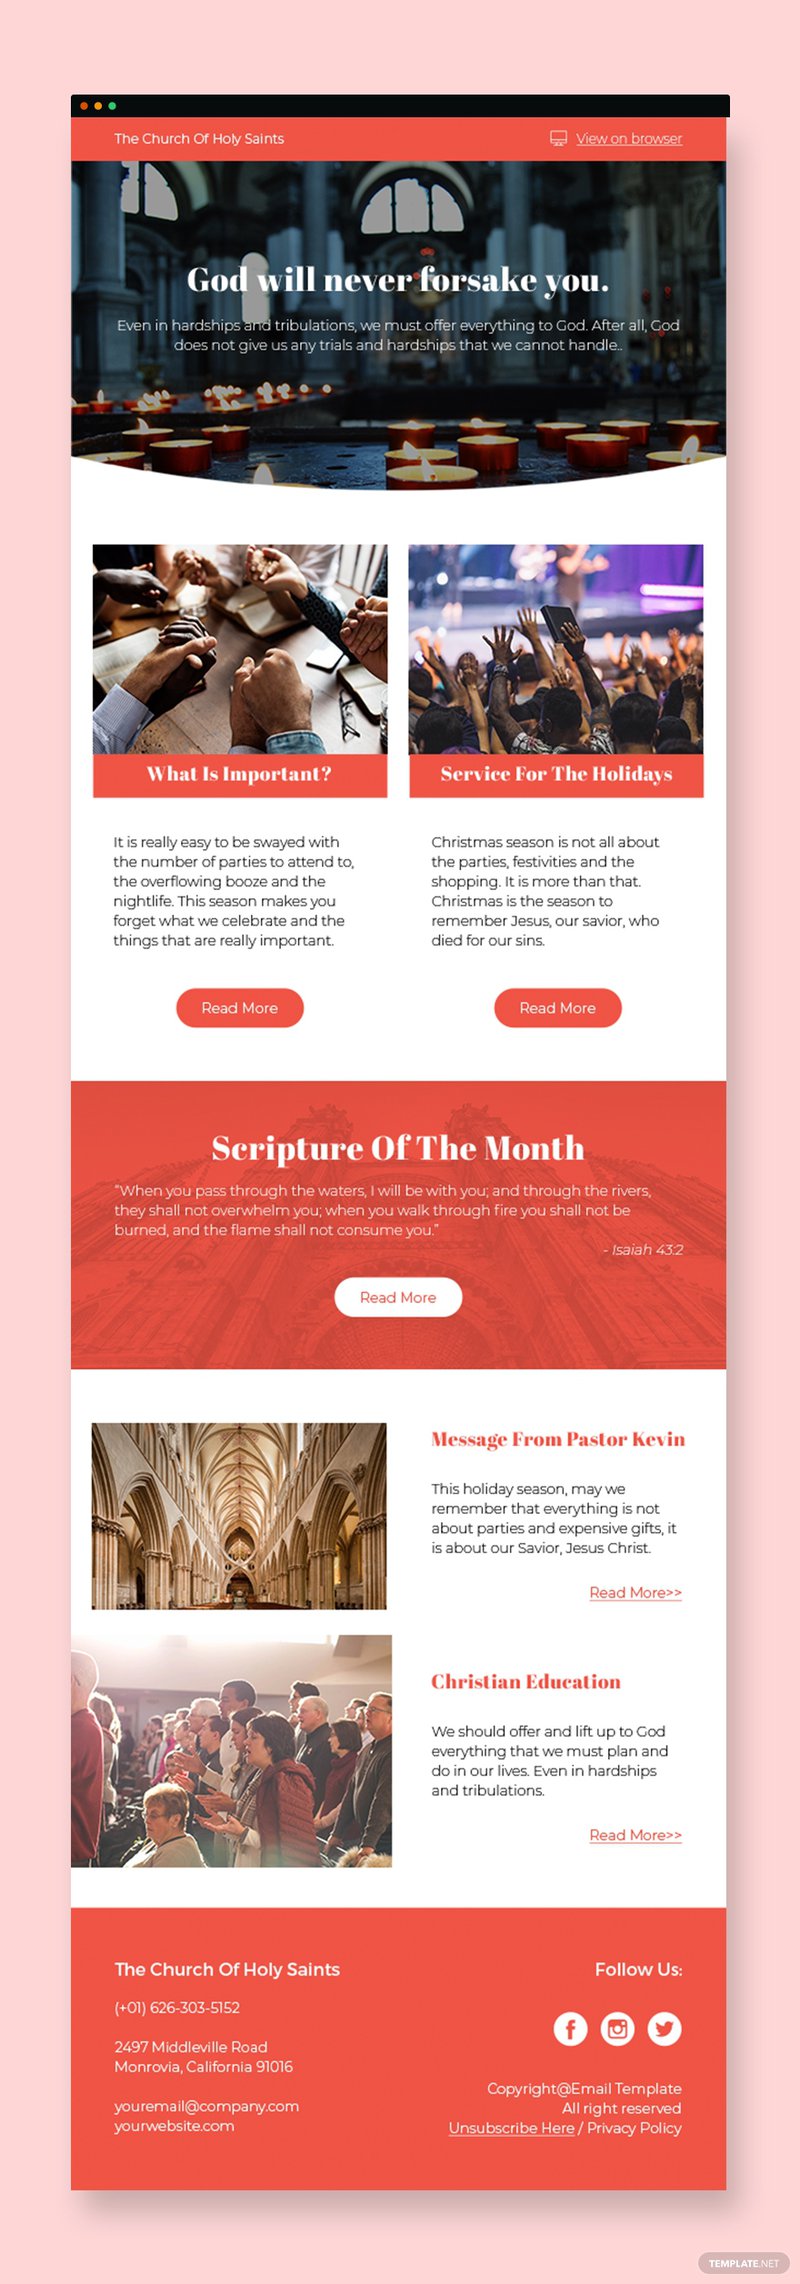 10 Free Church Newsletter Templates You Can Use Now